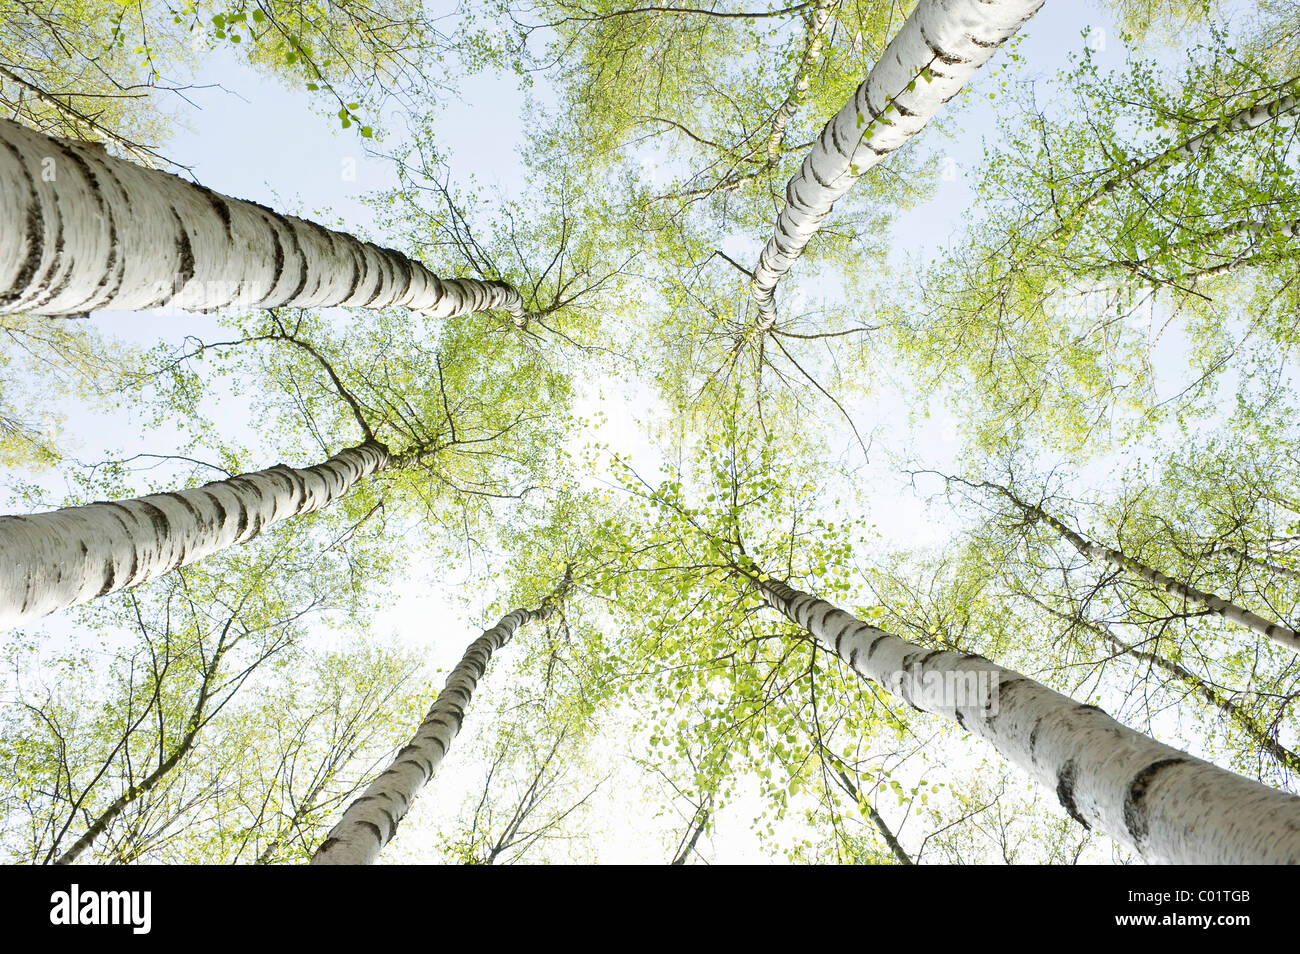 Birch trees in spring, frog perspective Stock Photo